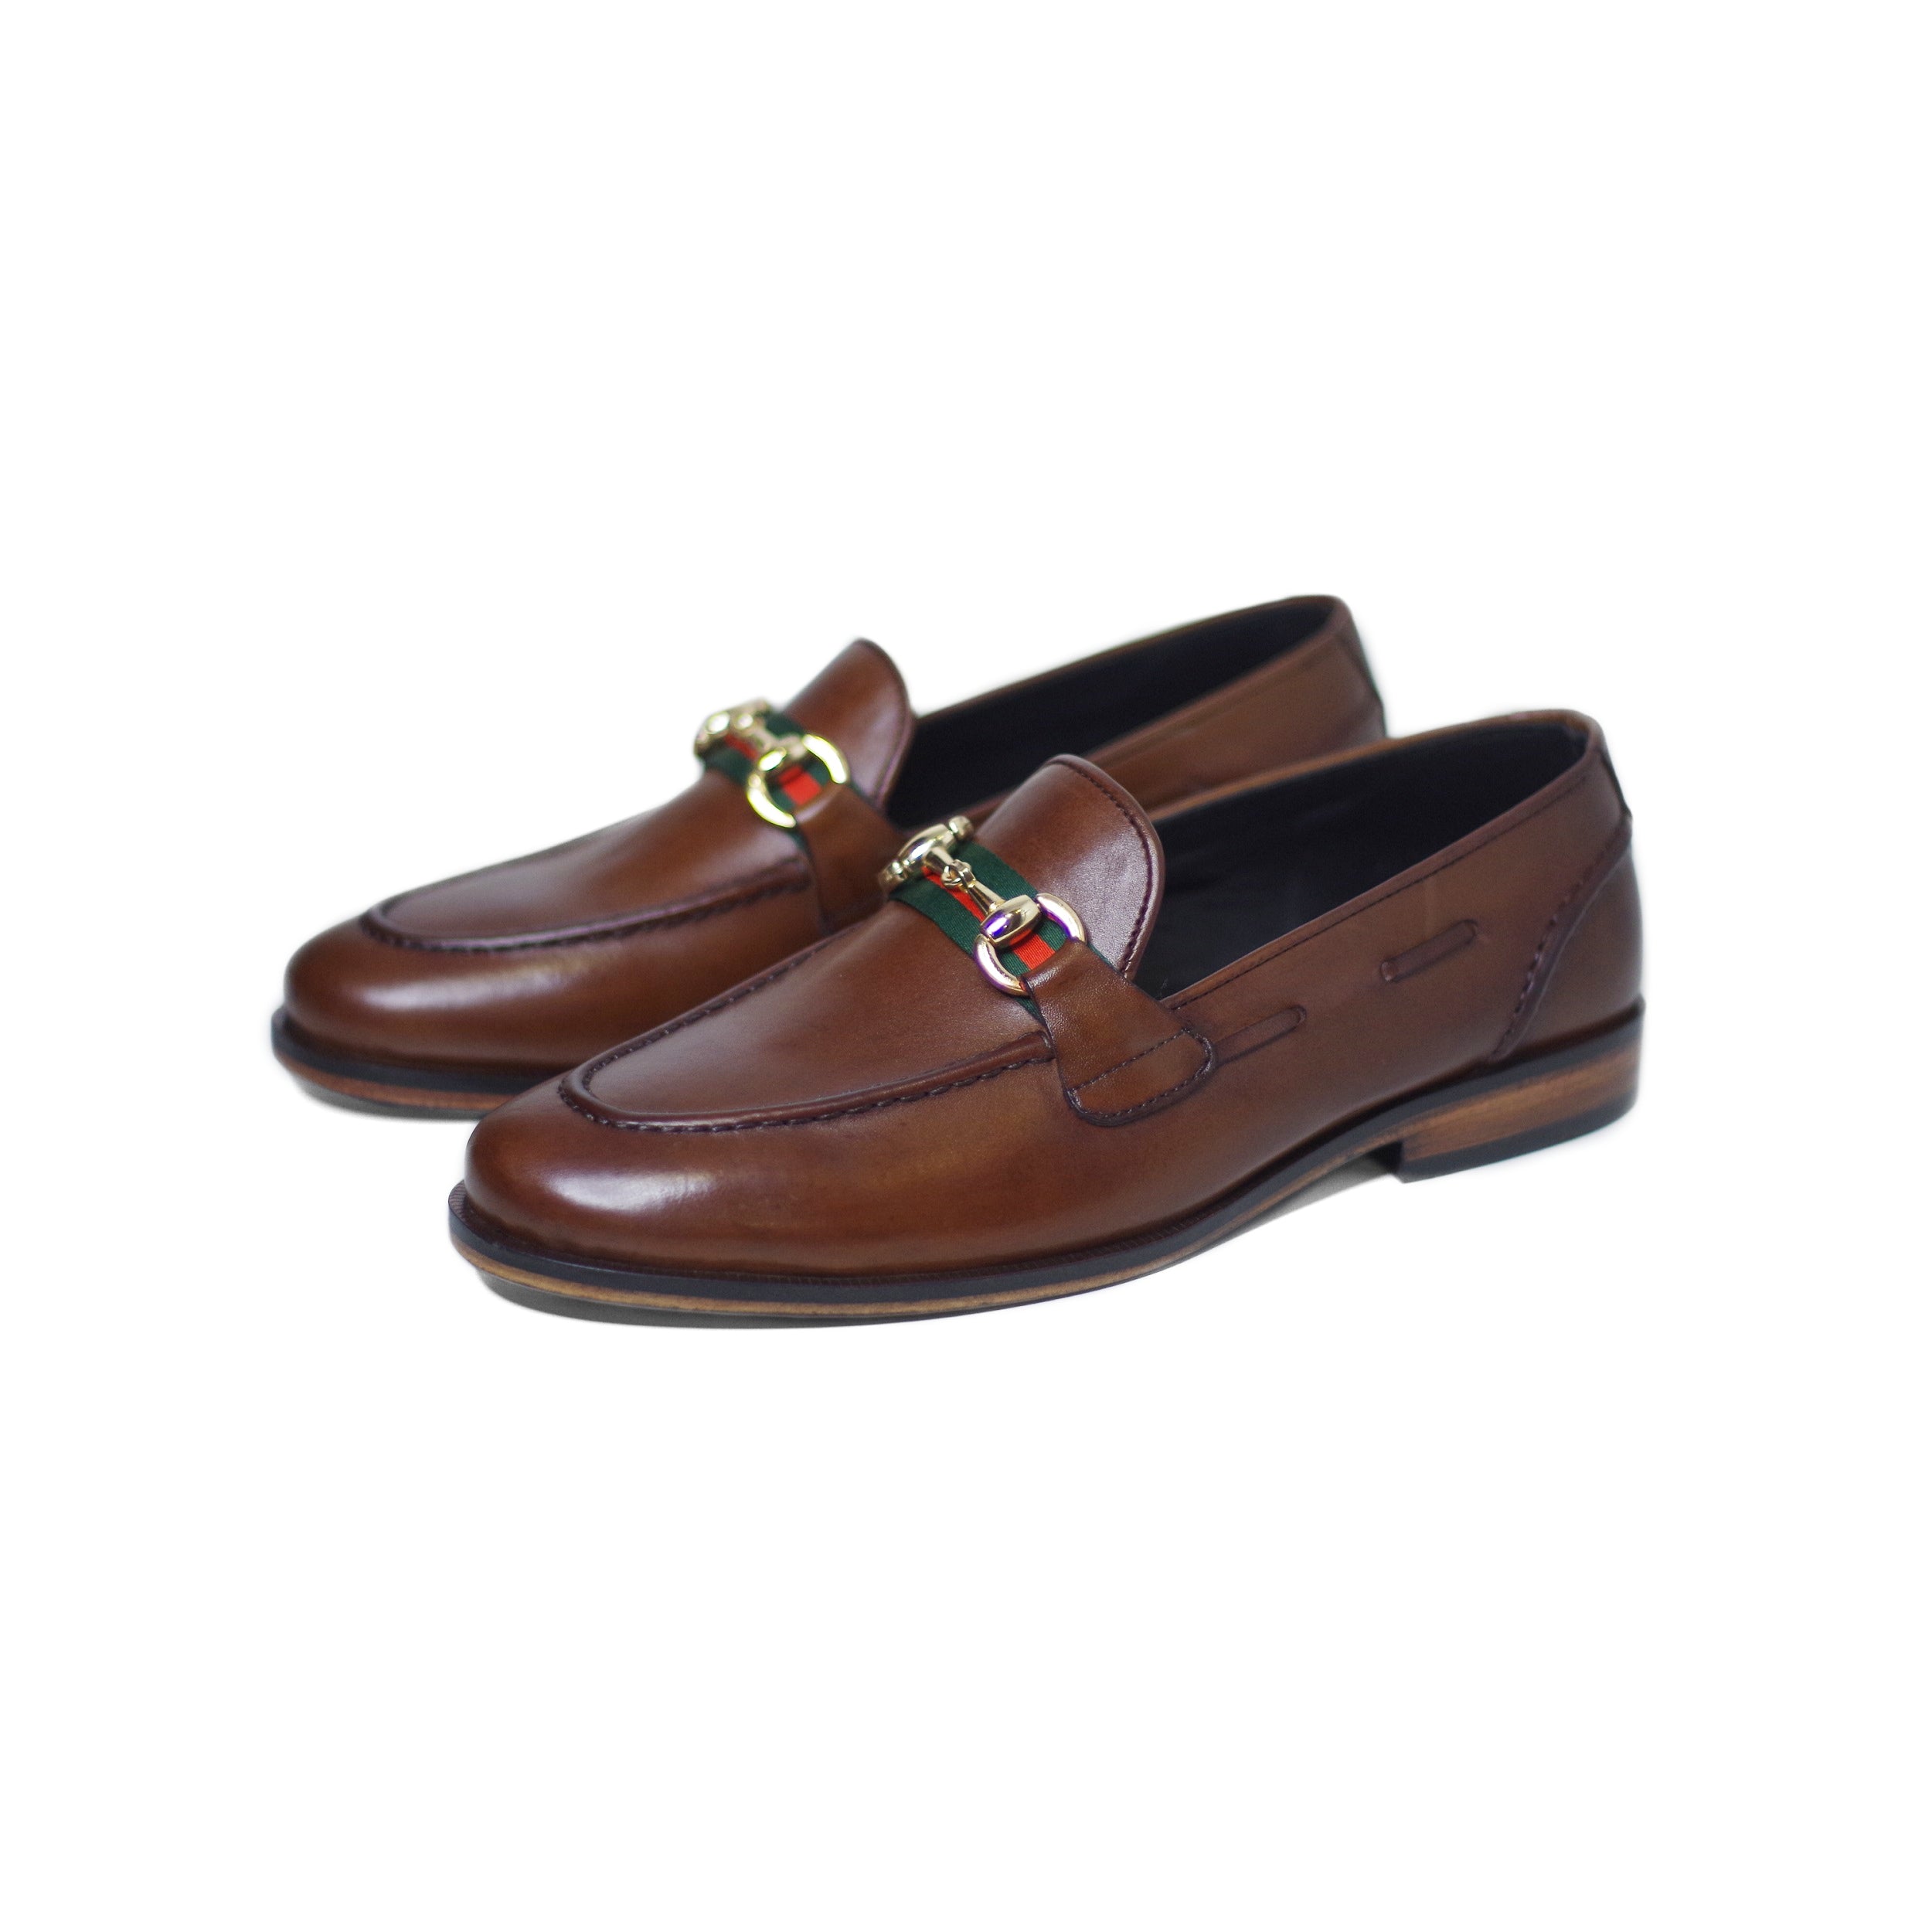 Brown & Black Colors Hand-Crafted Calf Leather Buckle Loafers For Men